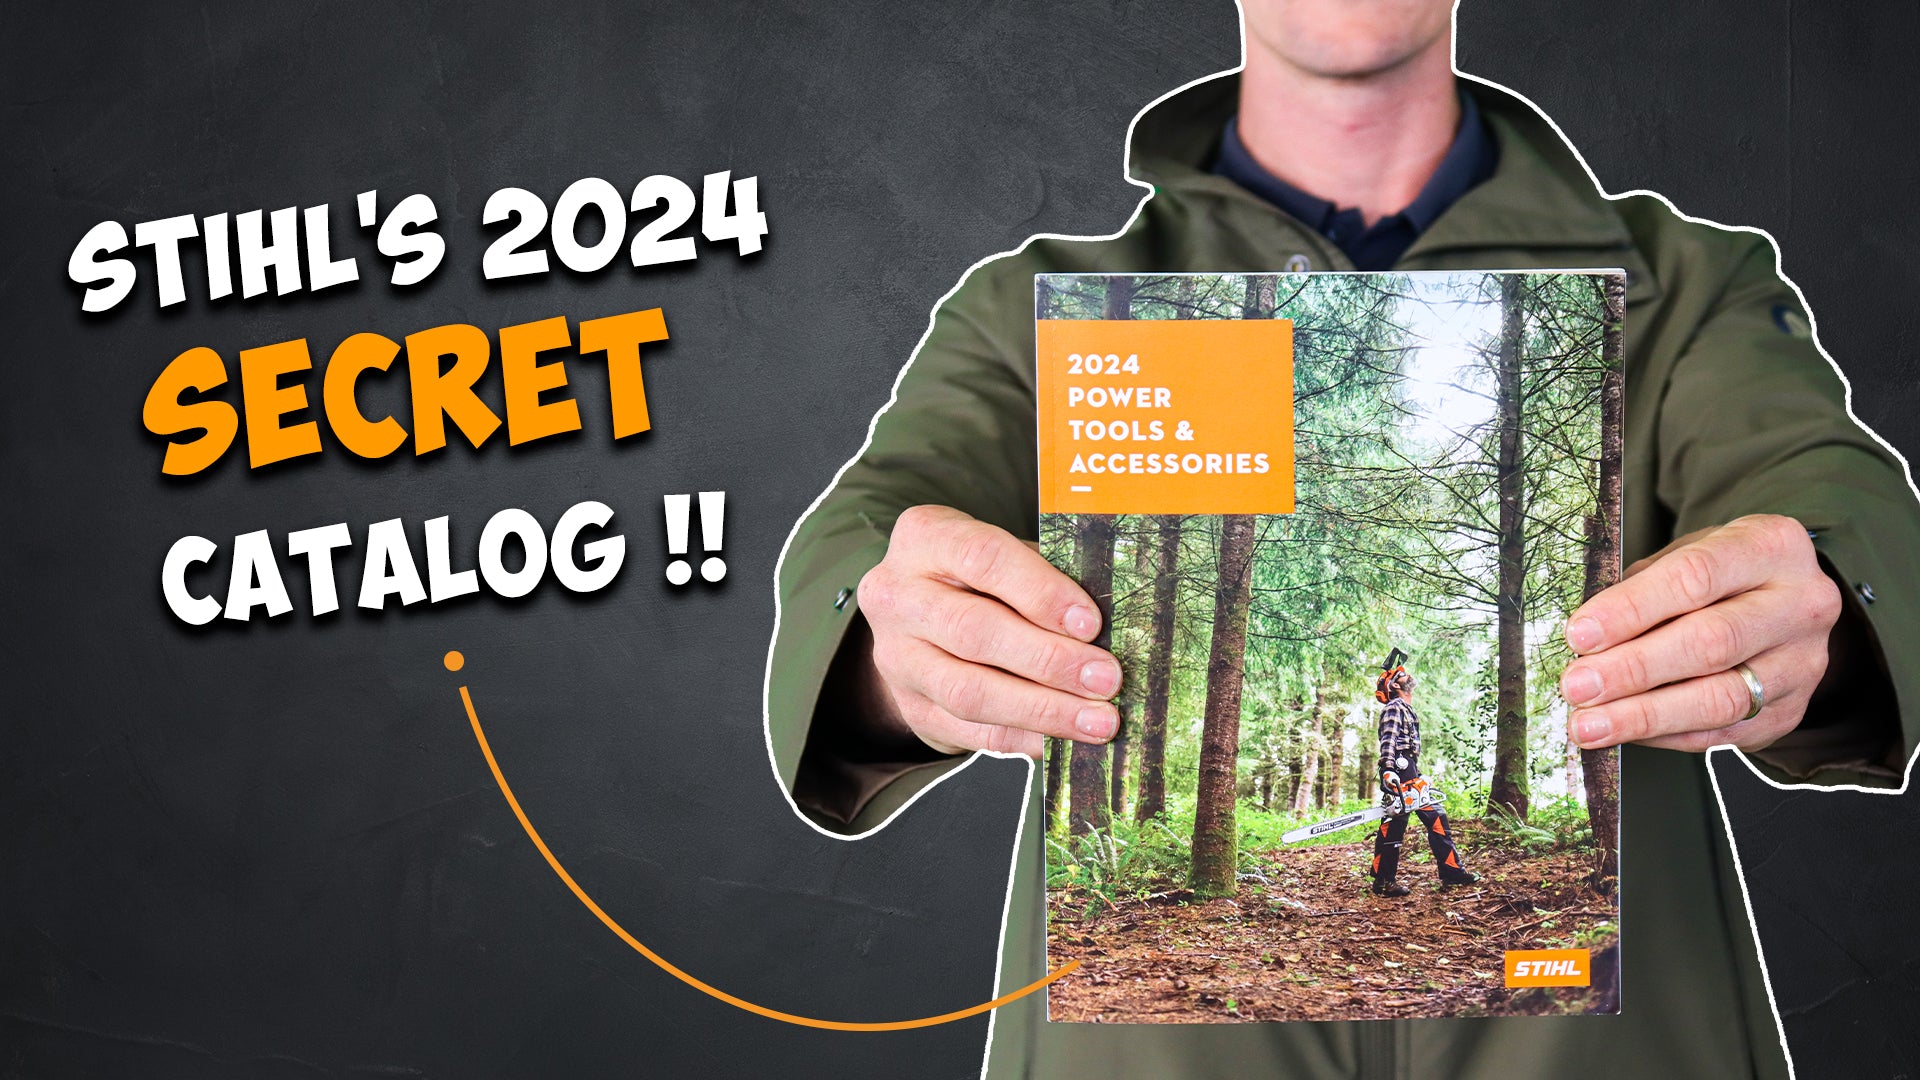 STIHL's 2024 Product Catalogue - Going over ALL THE NEW Products!